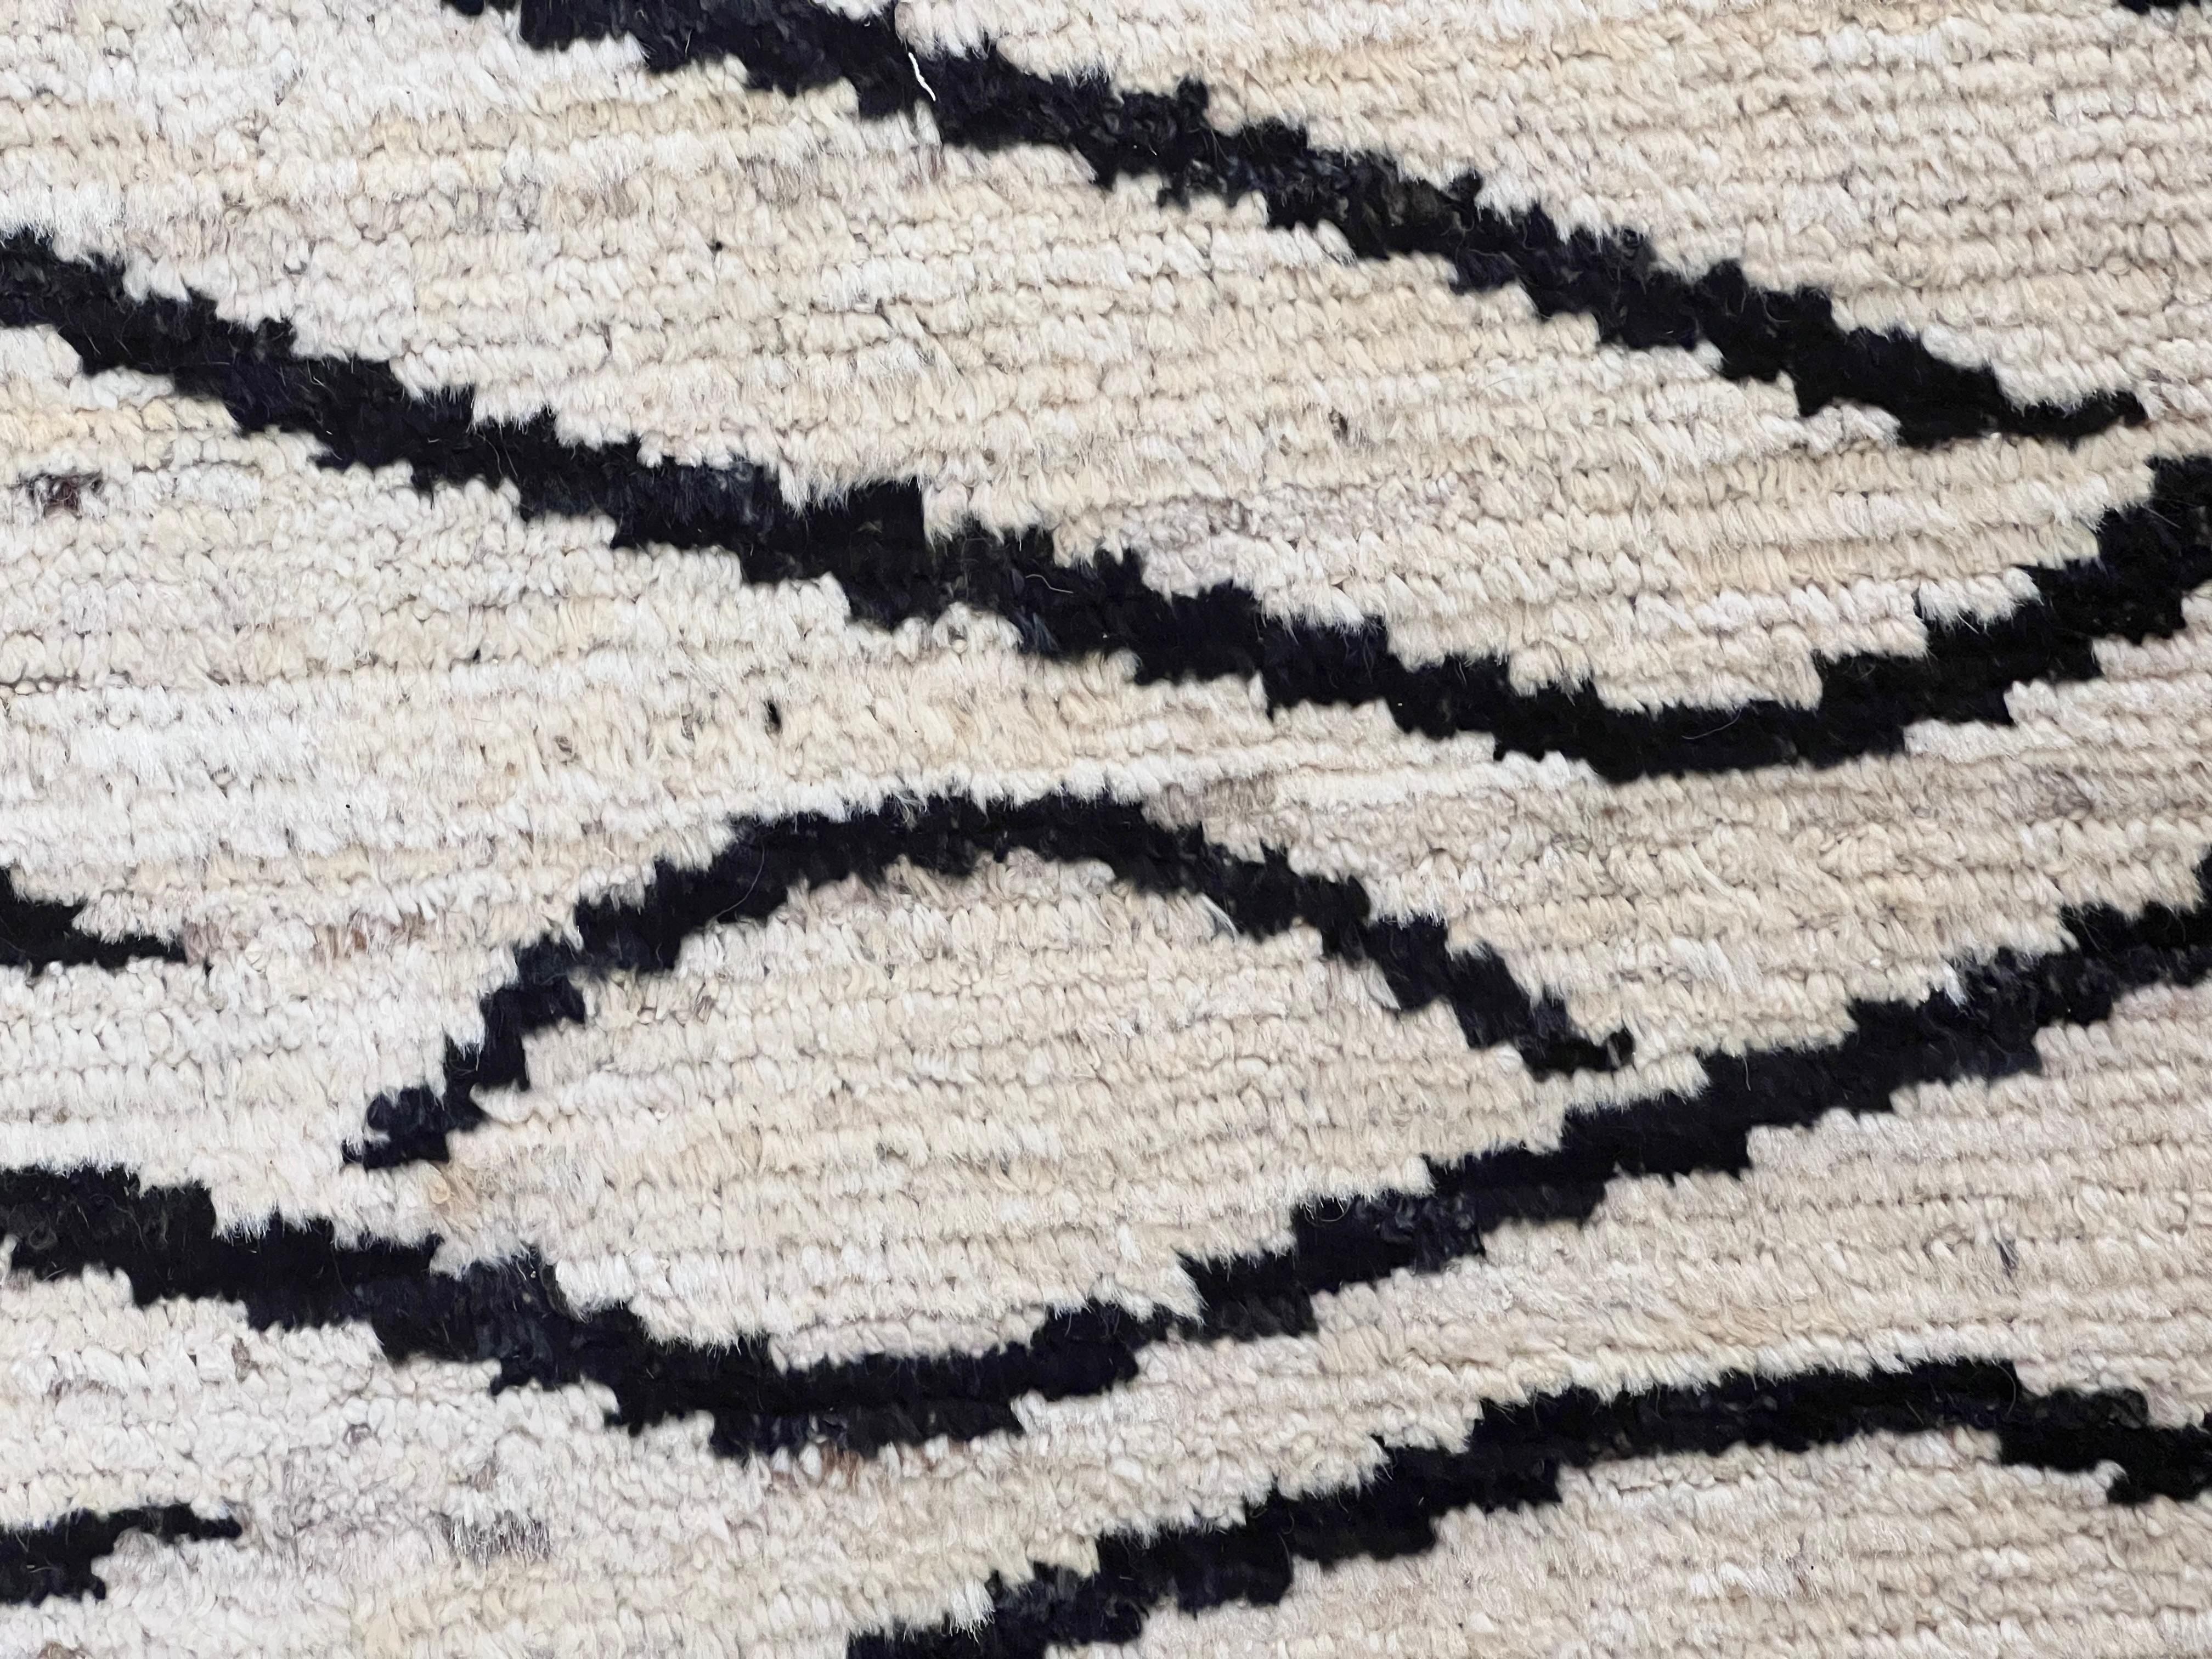 21st Century Tiger Black and White Afghan Runner Rug, Ca 2021 For Sale 3